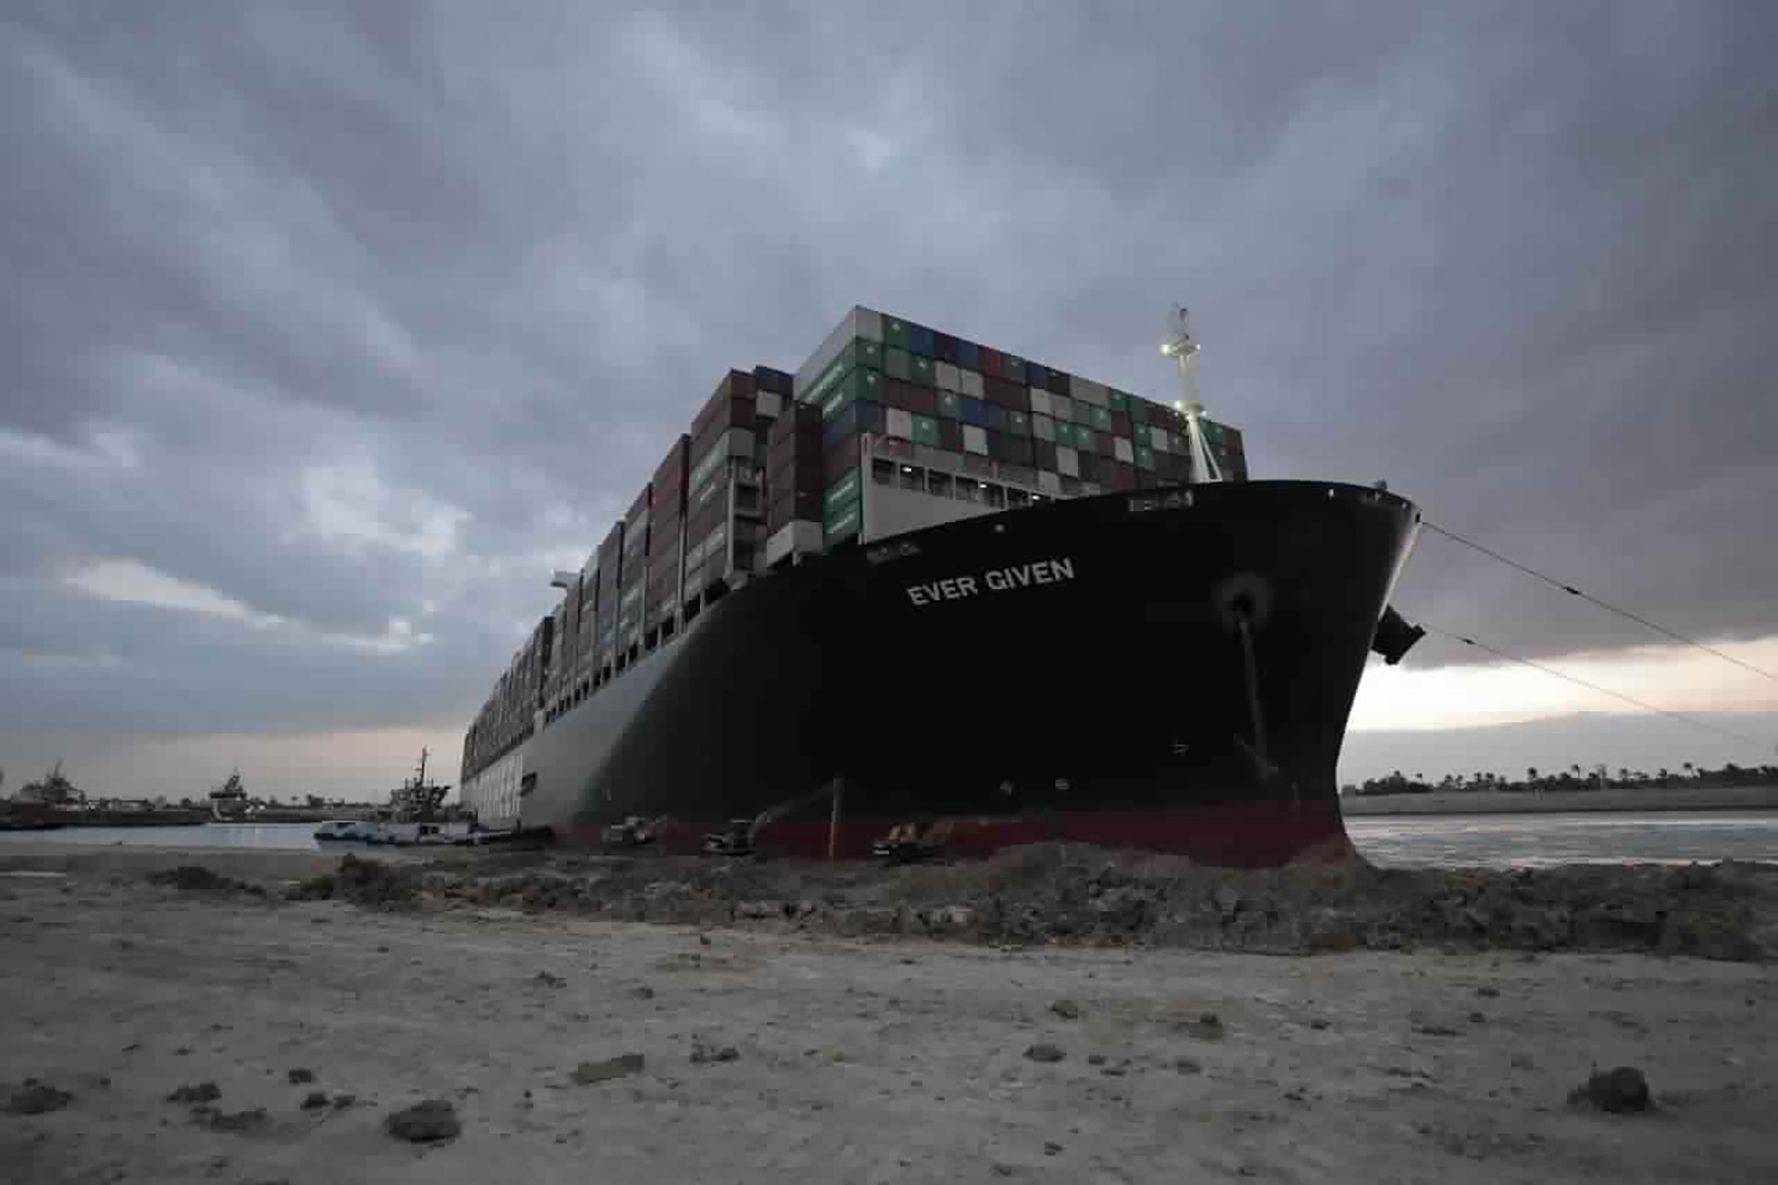 Giant ship ‘Ever Given’ blocks Suez Canal: What we know so far